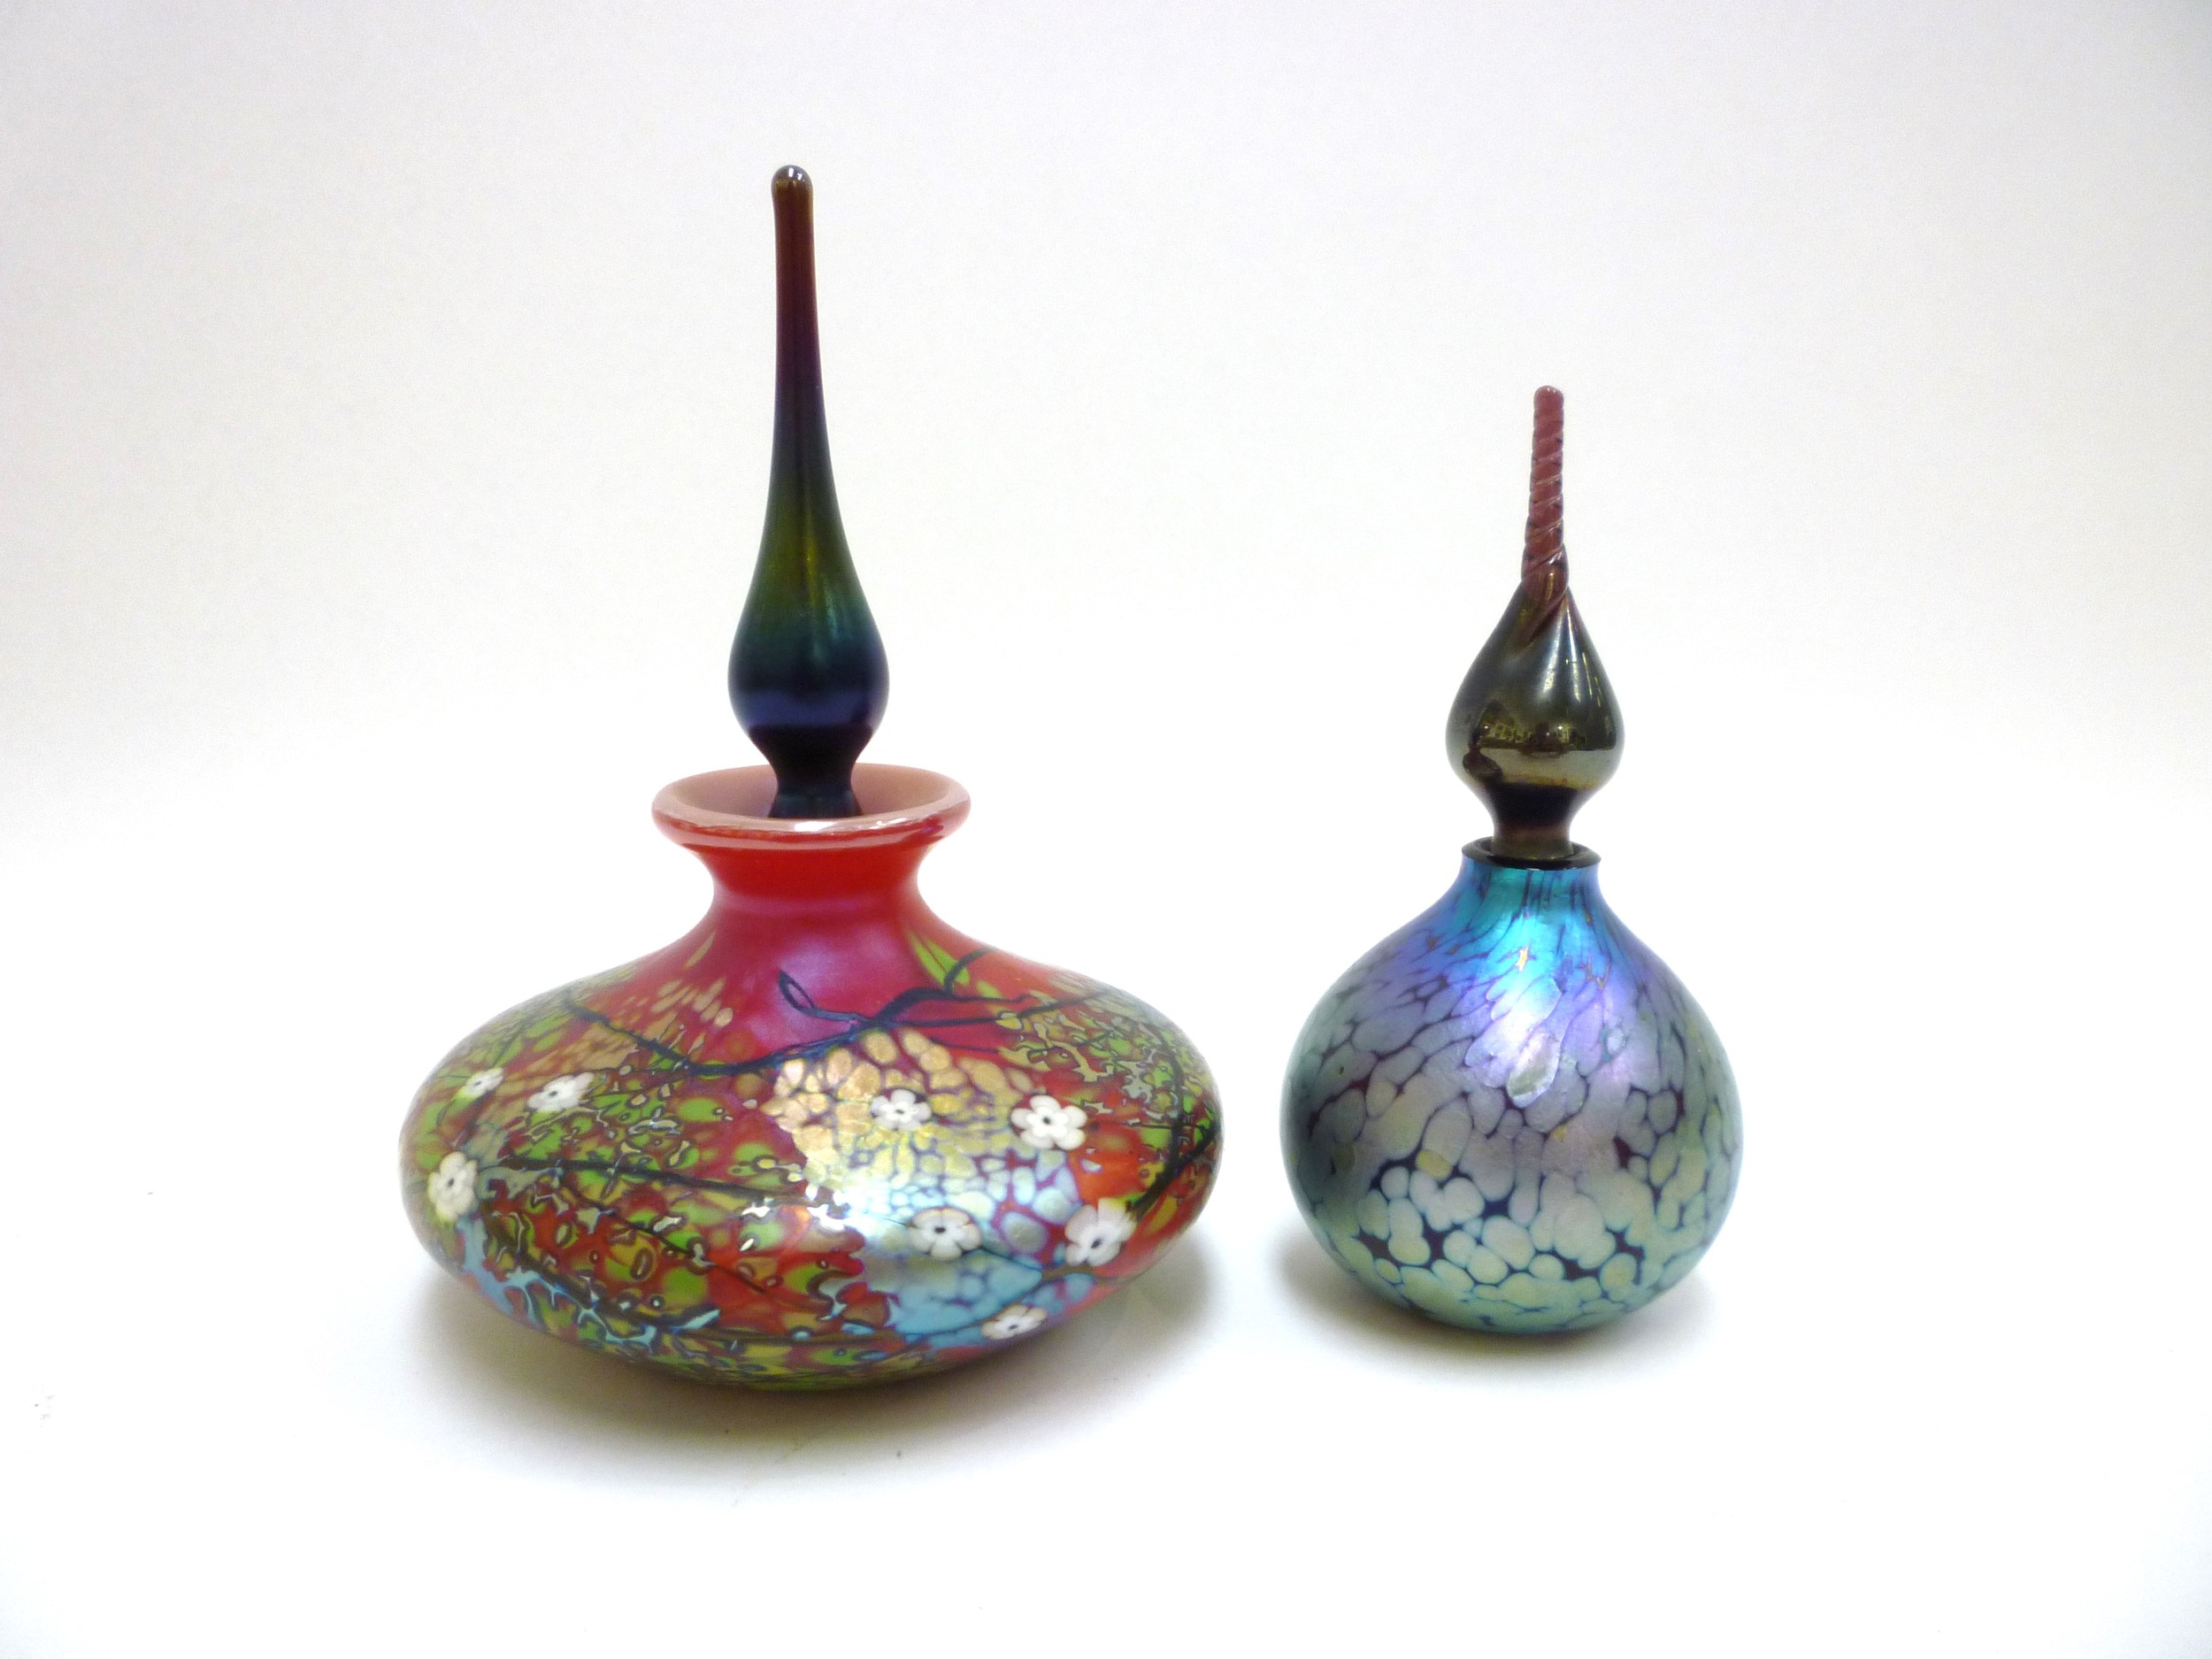 Two Okra glass scent bottles, one in red with floral detail, the other mottled iridescent blue